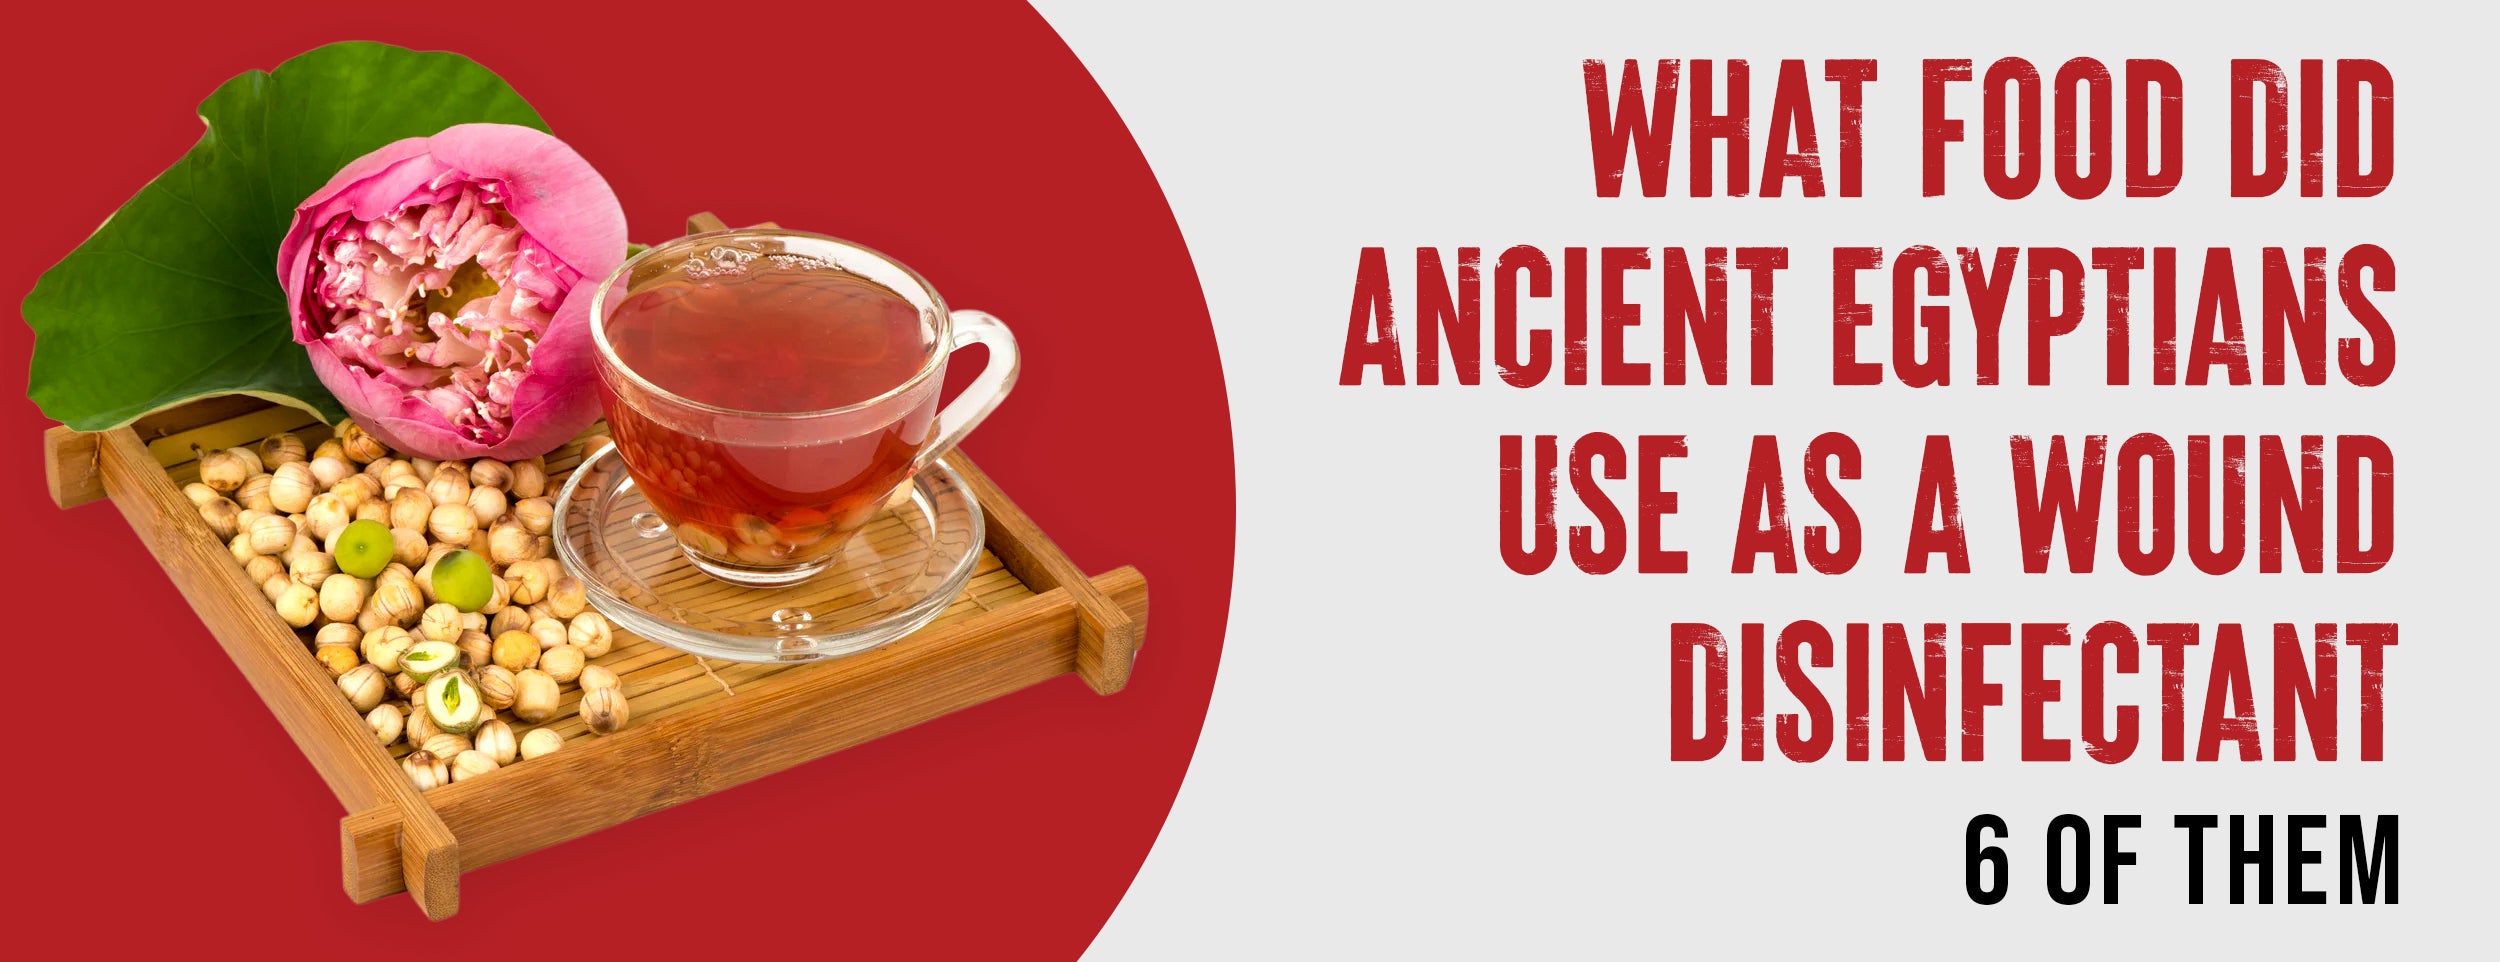 6 Ancient Egyptian Foods Used as Wound Disinfectants